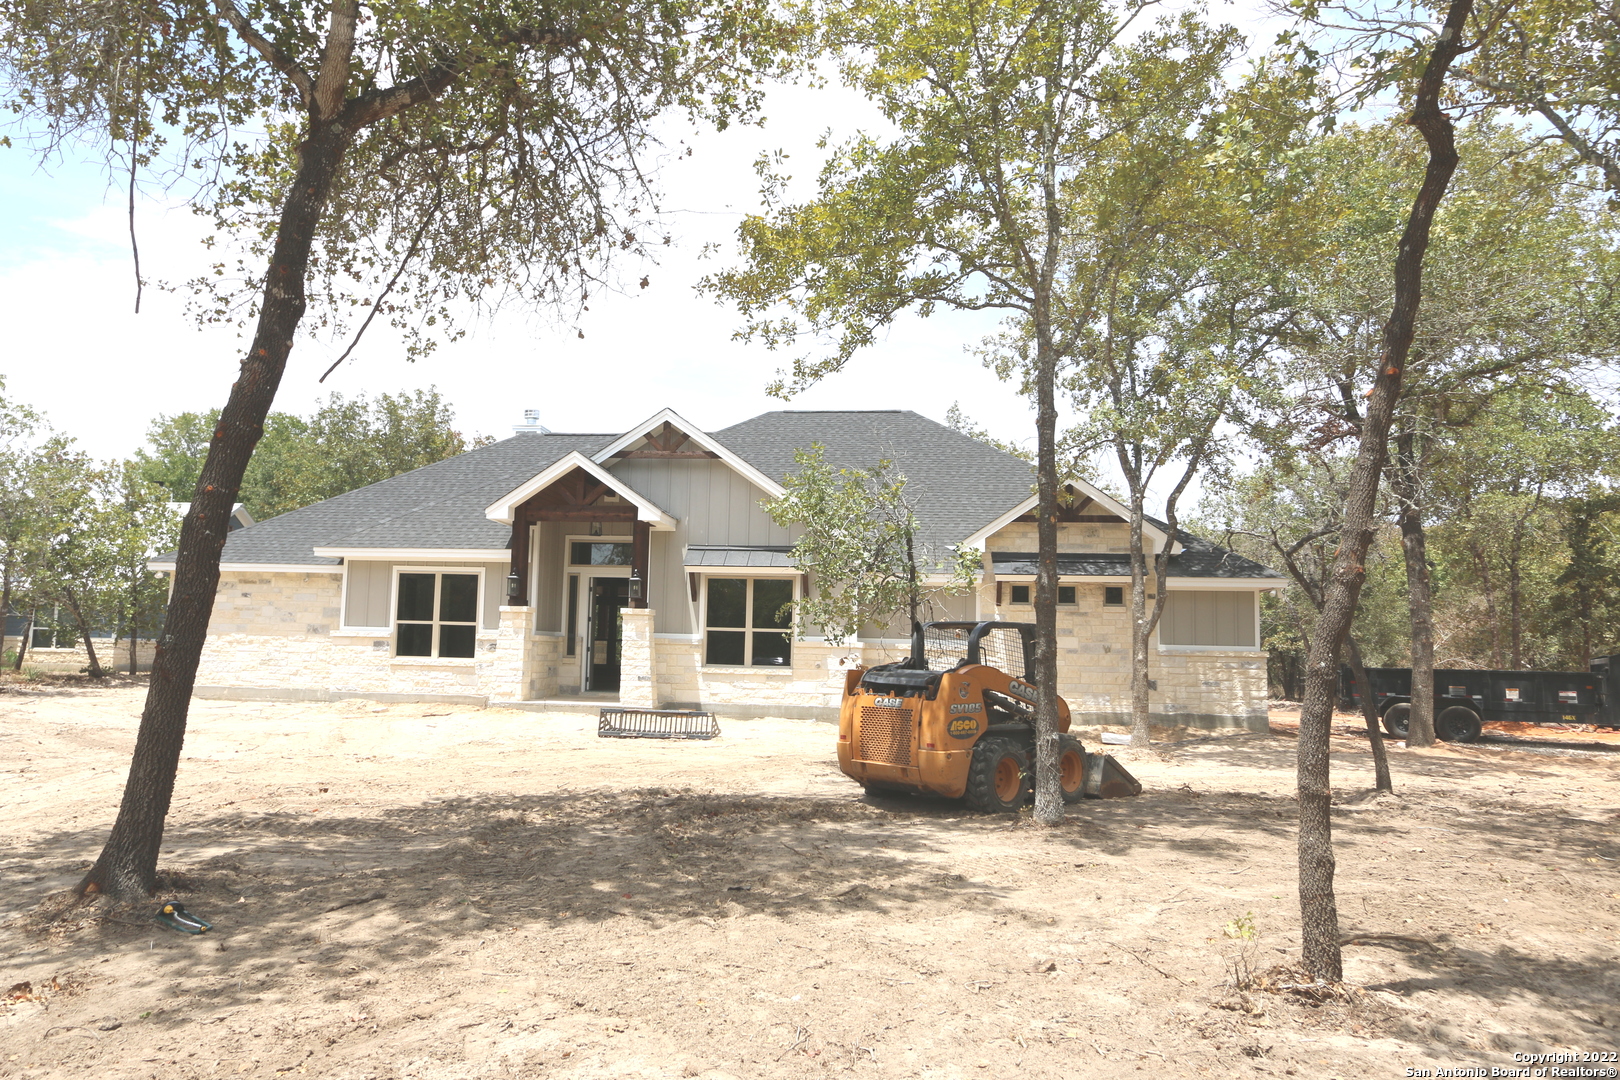 Under Construction in Woodvalley Acres Subd In Adkins Tx..that has NO City Taxes or Mandatory Hoa Dues & A Low 1.9% Tax Rate,Fiber Optics Internet is Available Thru GVEC,La Vernia ISD..Local Custom Home Builder that lives in the Same Subd & has built many homes in the area.. Nearly 2600sf Ranch Style 4-Side Rock Hm w/Lots of Upgrades on 1.55 ACRES w/Trees Galore..*Very Open & Bright Floorplan* w/Lots of Low E Dbl Paine Windows & Upper Transom Windows for Natural Lighting,4-BD's & 2.5 Bathrooms PLUS a Study OR Formal Dining Rm,Approx 17x15 Kit w/ Island & B'fast Bar w/Farmers Sink,Tiled Backsplash,Custom cabinets w/Under Cabinet lighting,Pot-Filler above Cooktop,SS Appliances & Walk in pantry,12x10 Dining Rm AND a 13x11 Formal Dining Rm OR Study w/Raised Beam Ceiling,22x20 Living Rm has Floor to Ceiling Rocked Fireplace & Raised Decorative Beamed Ceiling *Ceramic tile flooring & Granite Countertops Thru-Out* 8' tall doors,Lots of Crown molding,Grand Foyer Via the 10x7 Covered Porch,Split BD Plan w/20X18 Main Bd & 16x15 Main Bathroom that has 2-Sinks,Island Slipper Tub,Walk Thru Shower w/2-Heads & 2-Lg Walk in closets & Outside Access to the Approx 30x16 covered backyard patio w/beaded board ceiling..HM Has Radiant Barrier Roof Decking,Roof Ridge Vent,Exterior flood & soffitt lighting AND Will Have a Partial Landscape Pkg to include Sod,Plants & Sprinkler Sys..Again Local Home Builder,10-YR Warranty  **Call 4 Copy of Floorplan,Tax info,Restrictions,Survey ETC**  "COUNTRY LIVING"